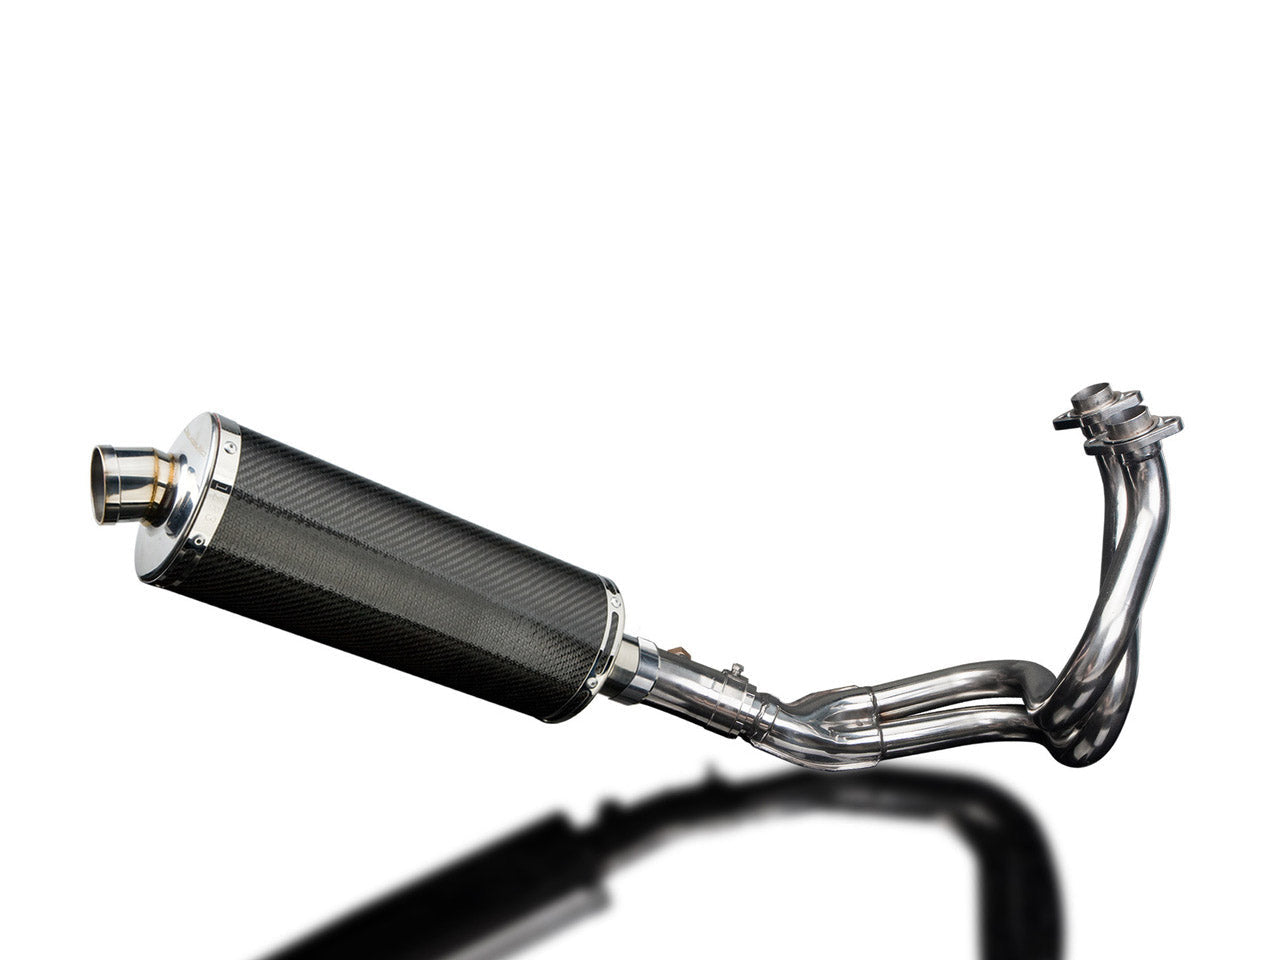 DELKEVIC Kawasaki Versys 650 (07/14) Full Exhaust System with Stubby 14" Carbon Silencer